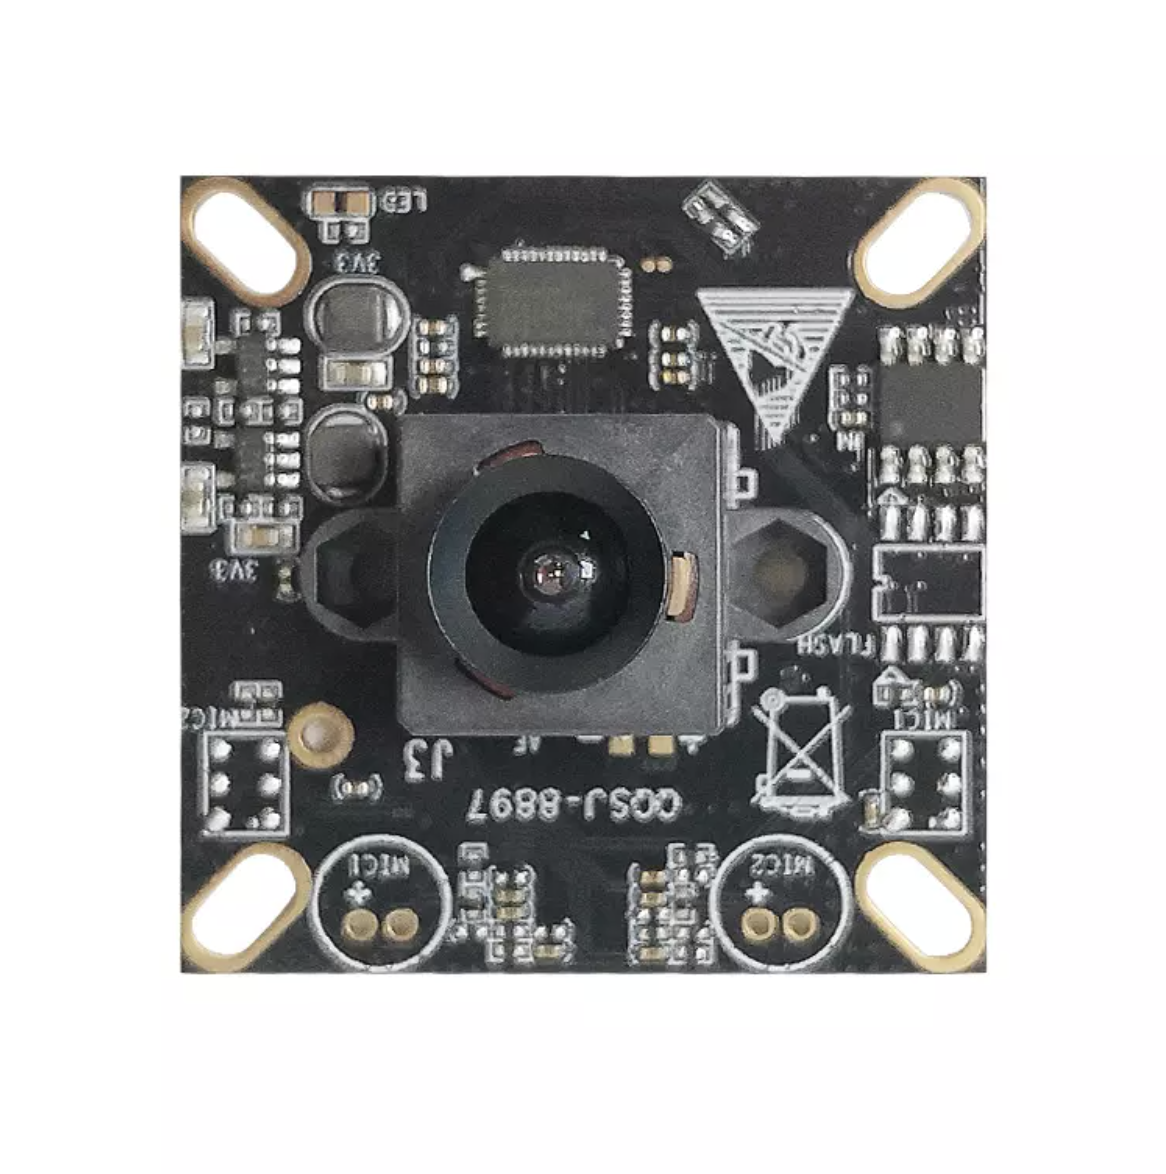 Factory Price Imx335 - COMS Imx335 1/2.8  5MP Face Recognition Payment System Auto Focus 30fps MJPEJ IMX335 USB Camera Module – Ronghua